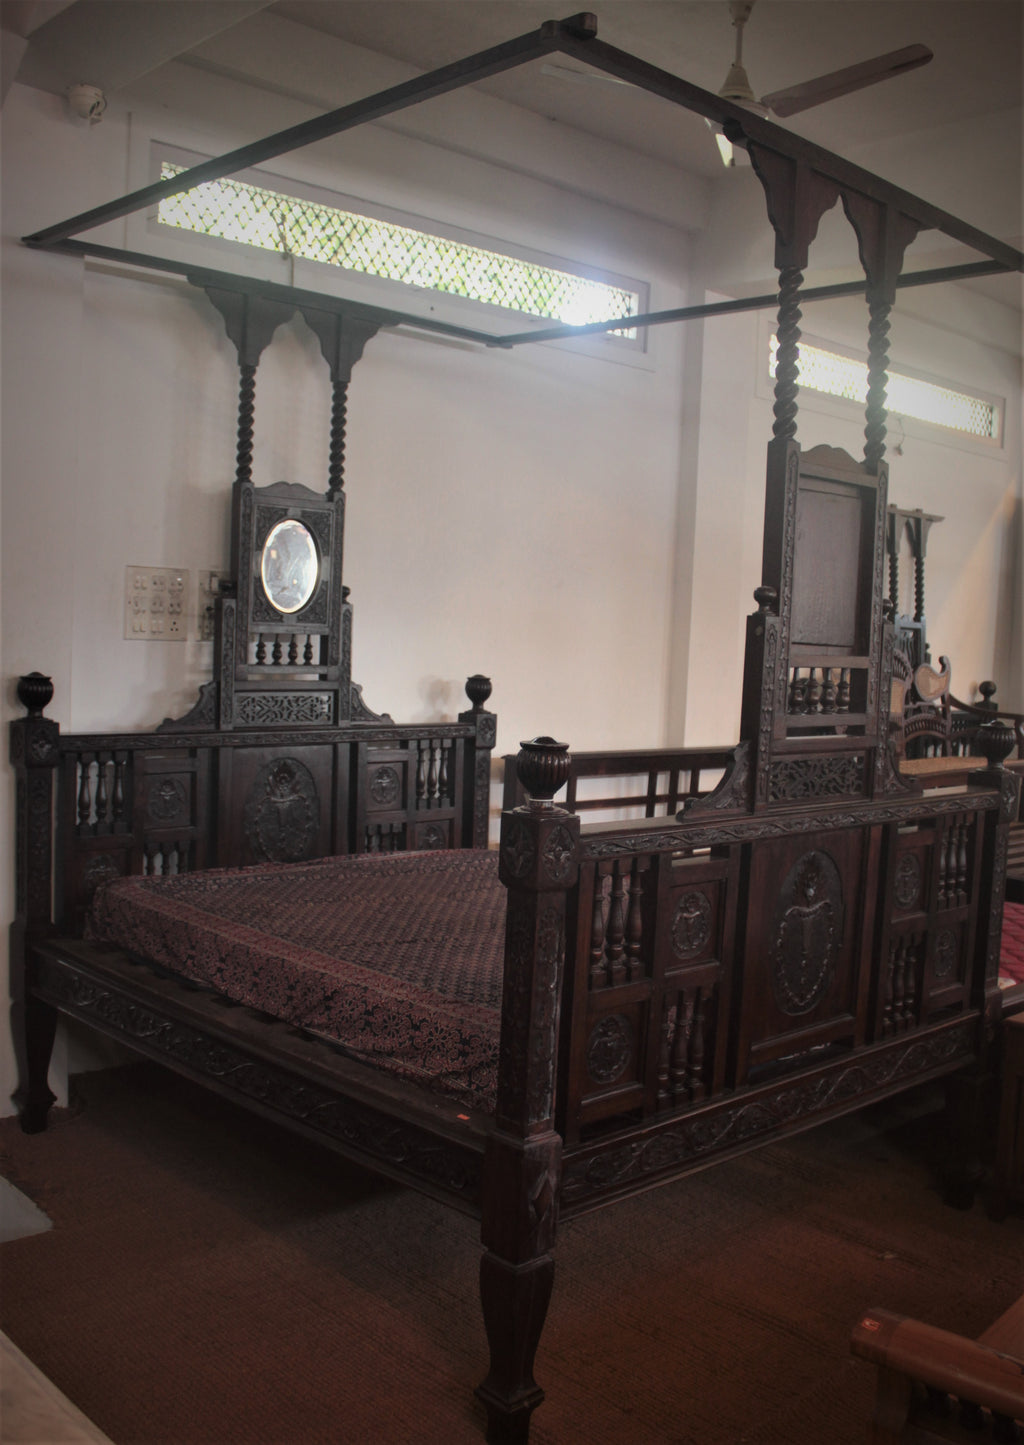 FOUR POSTER BED WITH FLORAL PATTERN